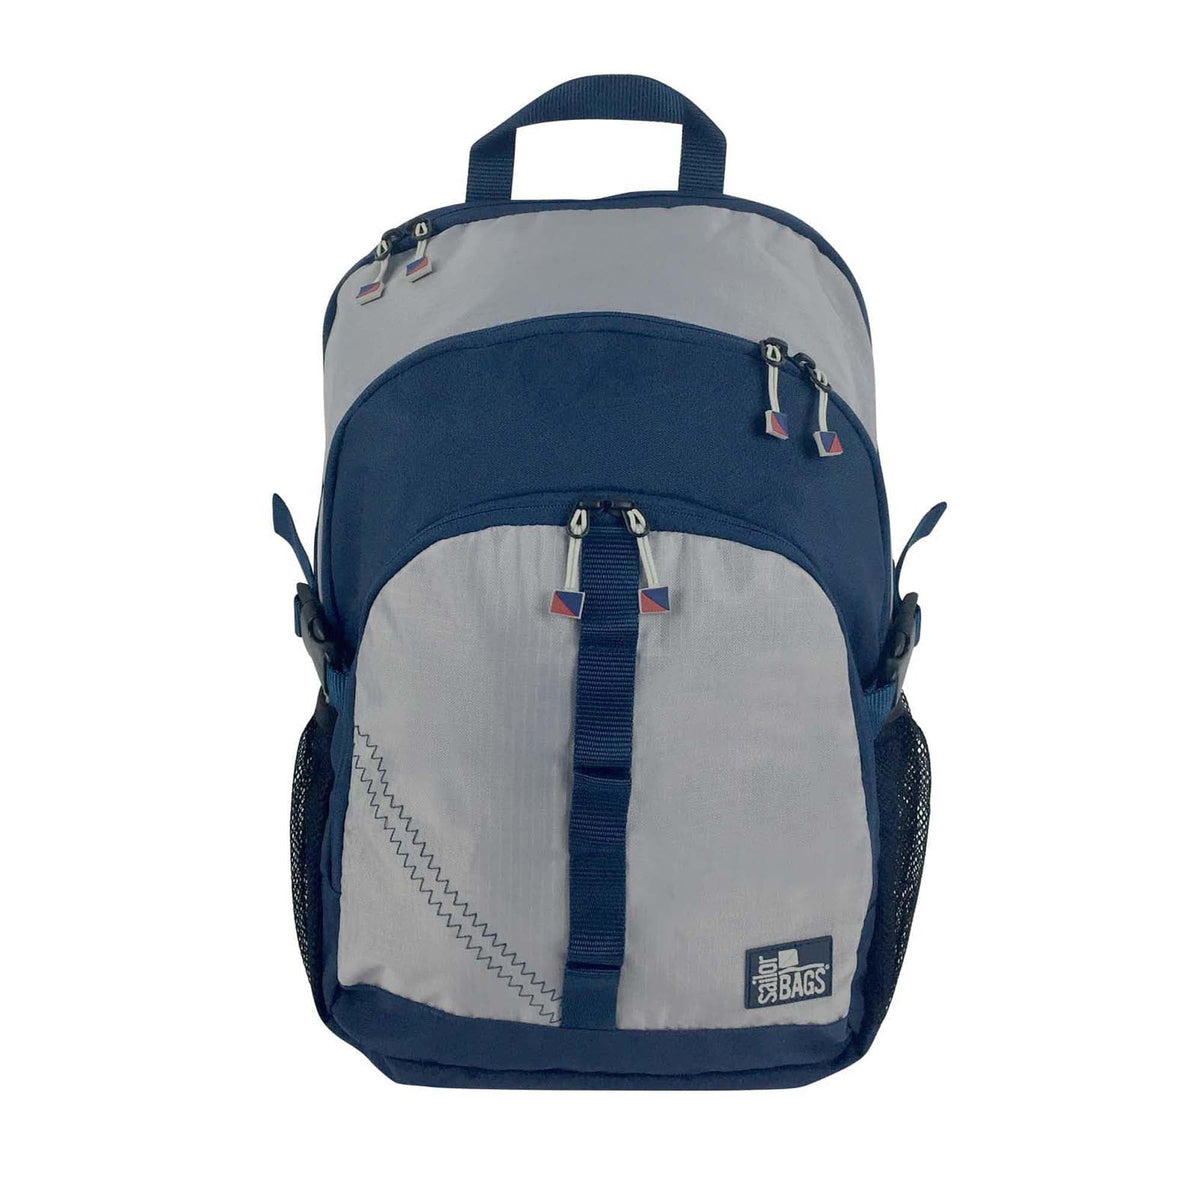 SailorBags Silver Spinnaker Daypack